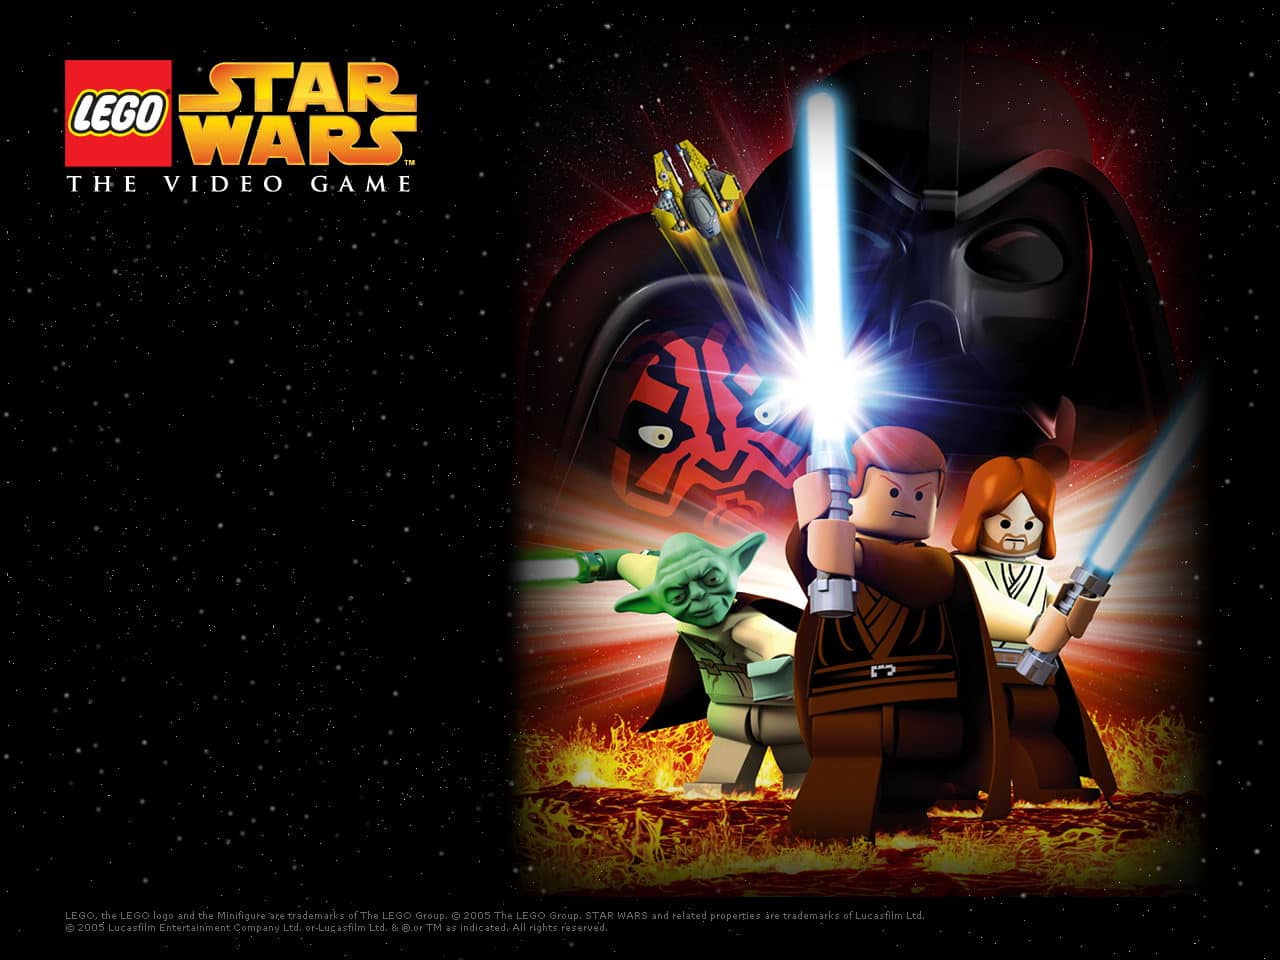 Lego Star Wars cheat for characters and other unlockables - Video Blogger